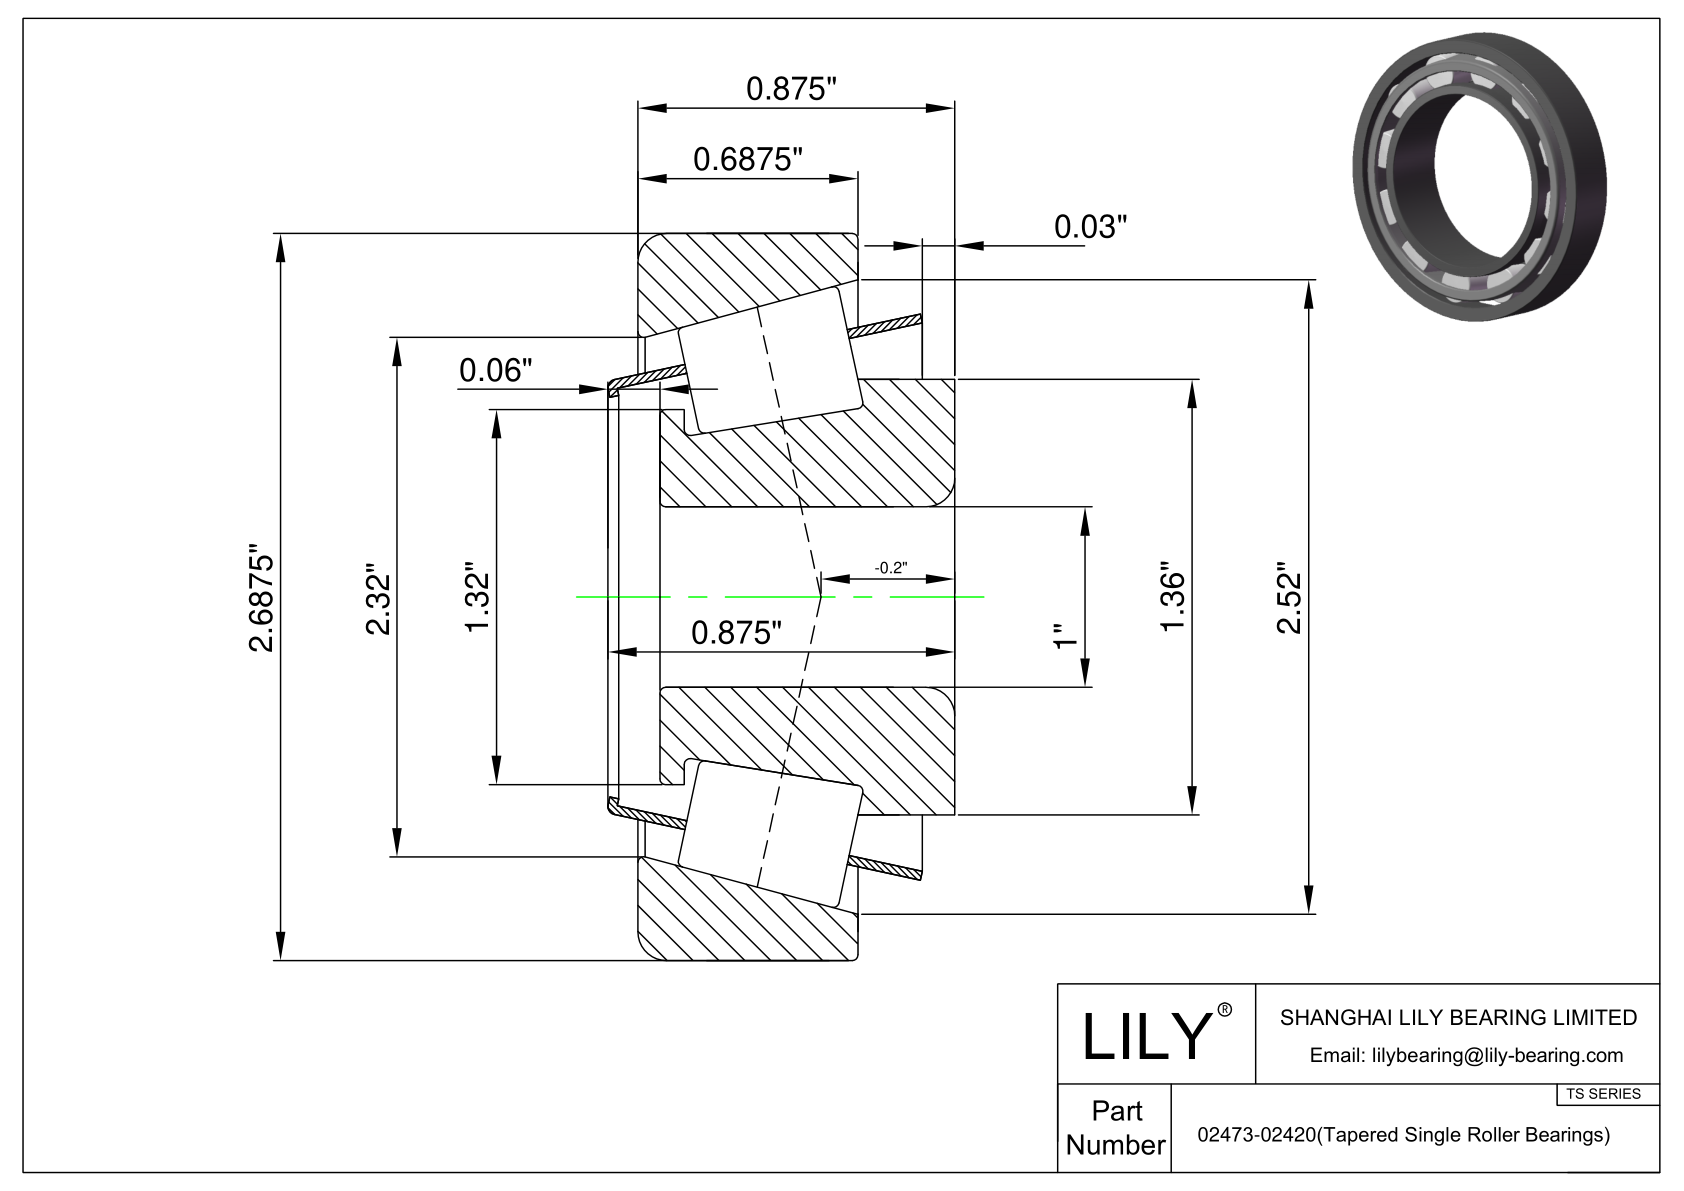 02473-02420 TS (Tapered Single Roller Bearings) (Imperial) cad drawing